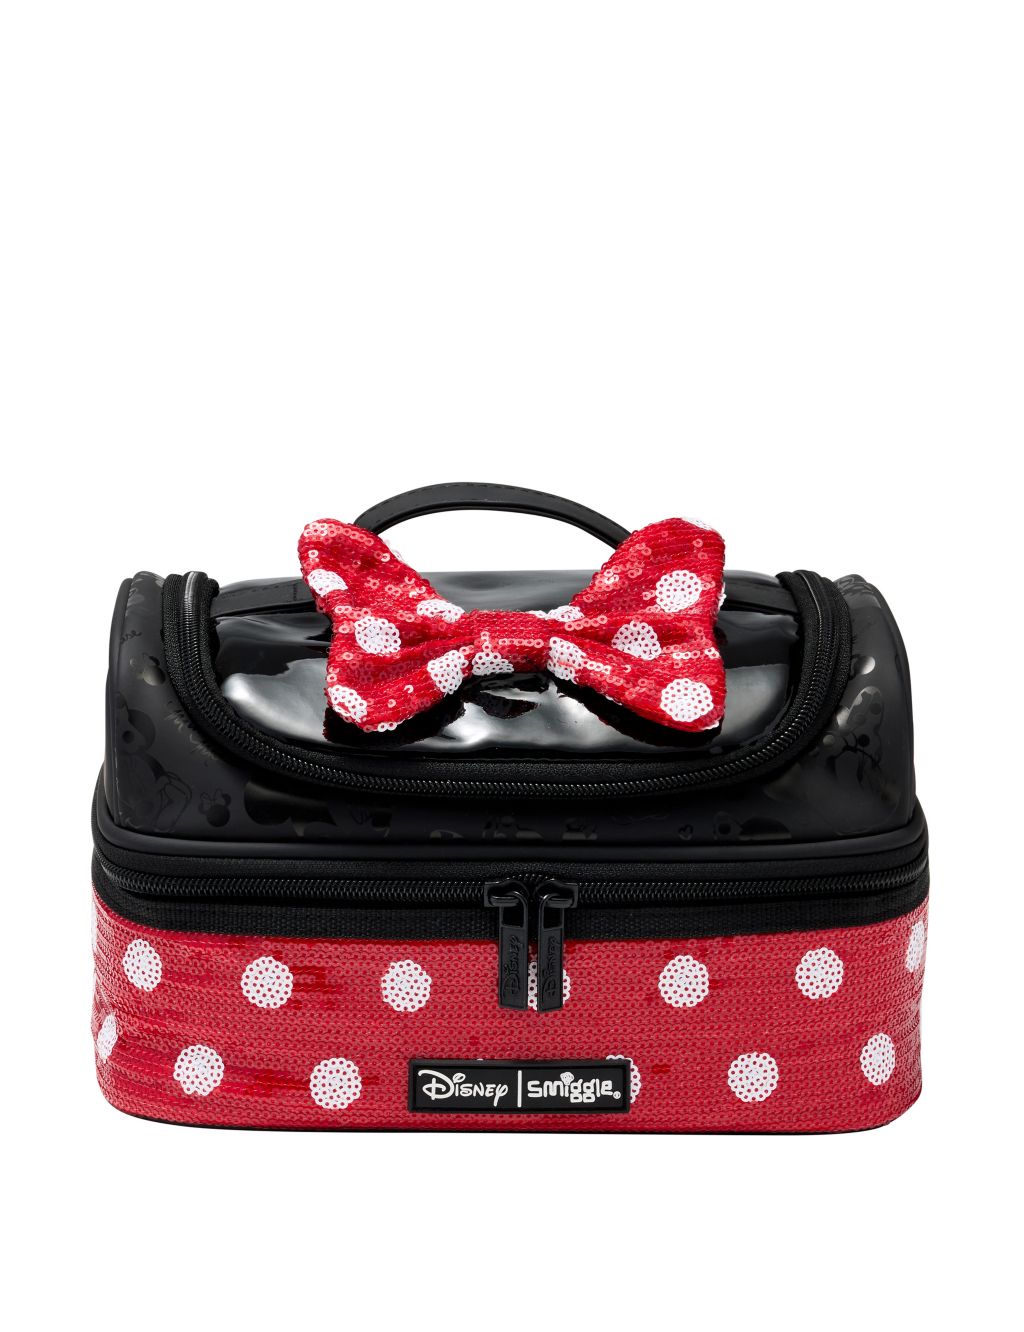 Kids' Minnie Mouse™ Lunch Box (3+ Yrs) image 1